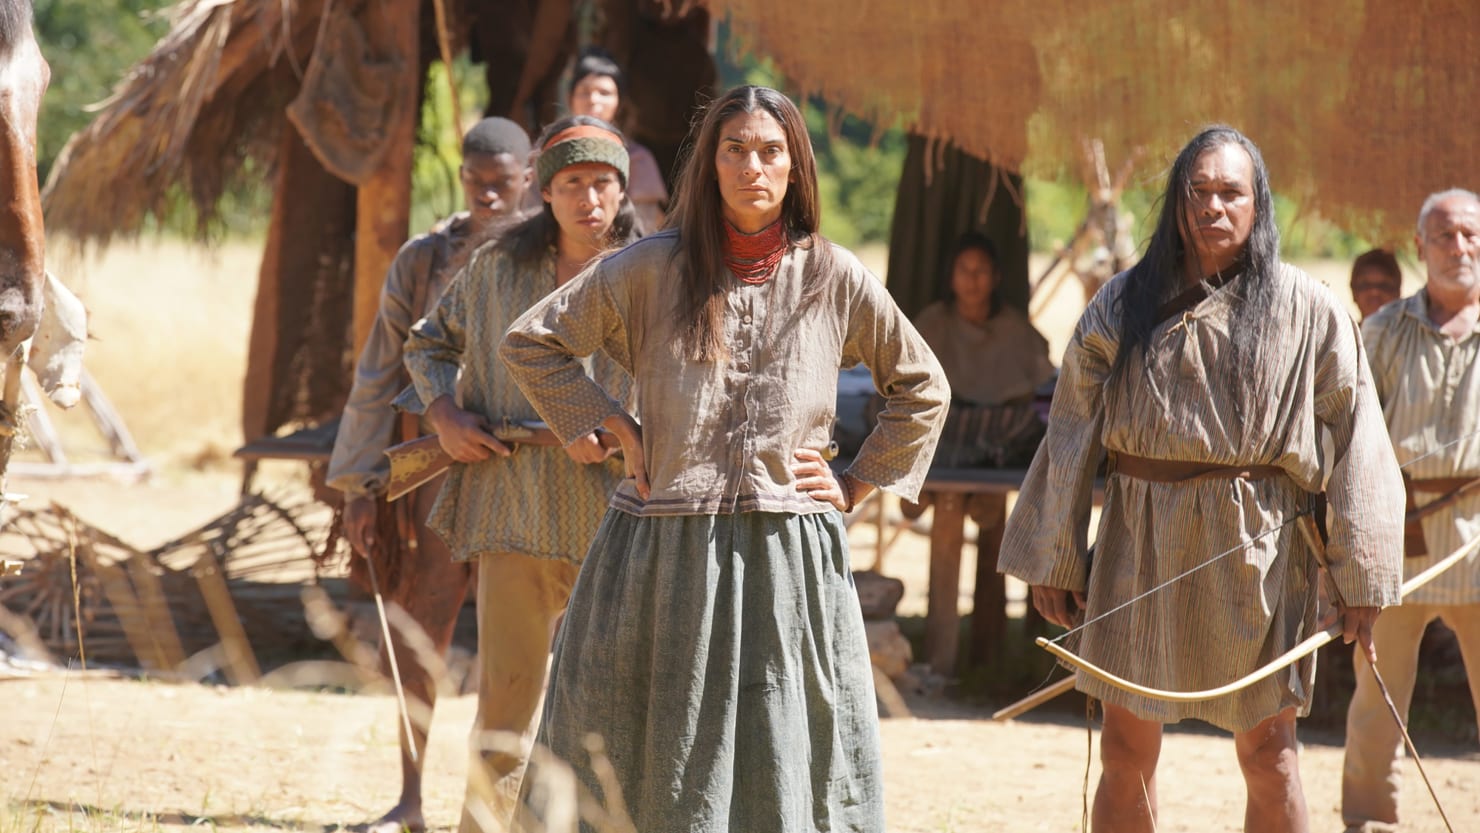 HBO’s ‘Exterminate All the Brutes’ is a flawed study of white colonialist rape and terror